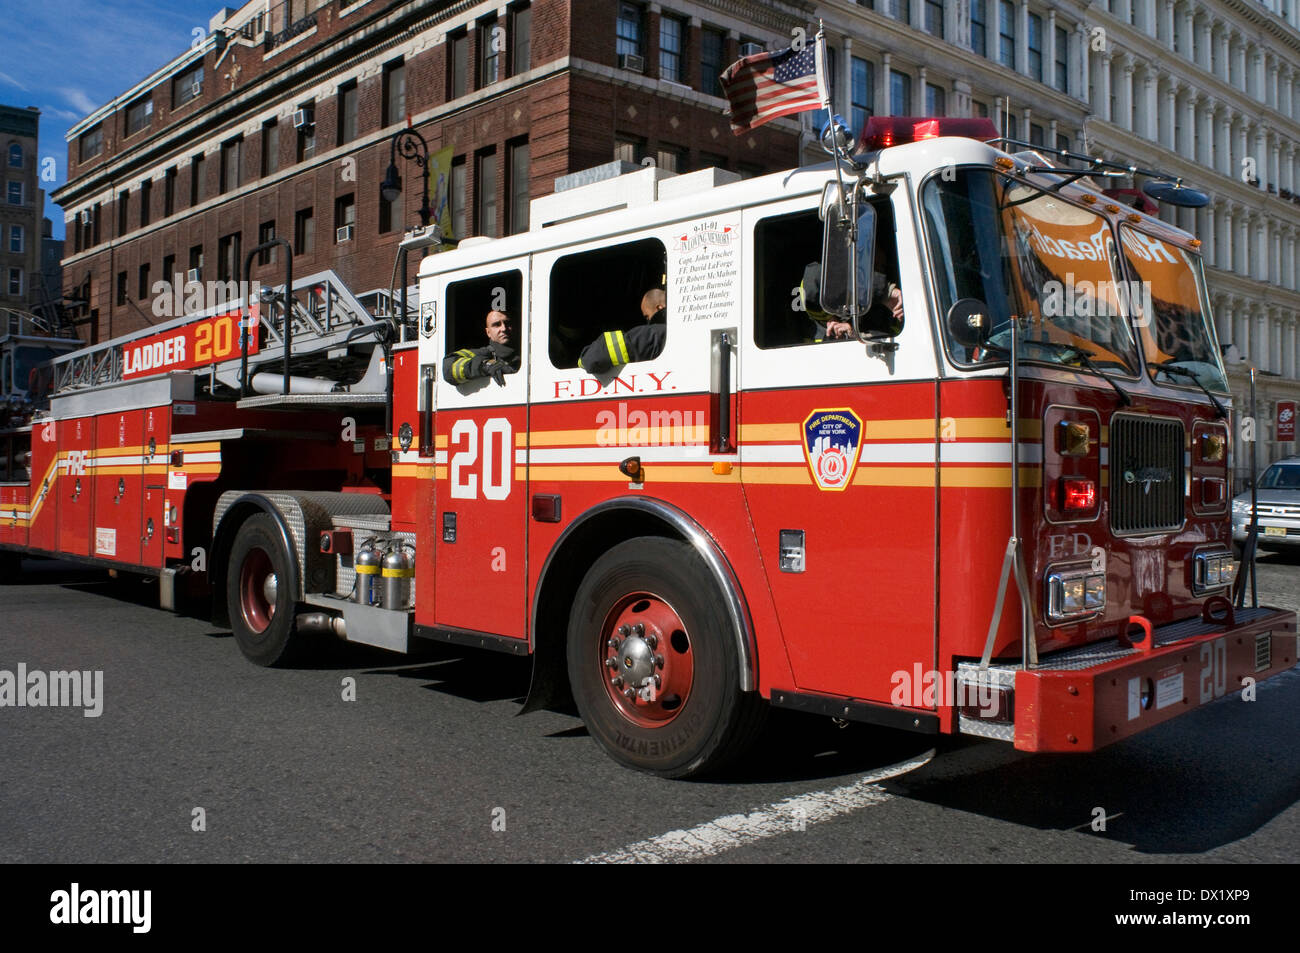 A fire truck from the East Village. East Village is probably the social mecca of New York. Unlike Greenwich Village, Village Eac Stock Photo